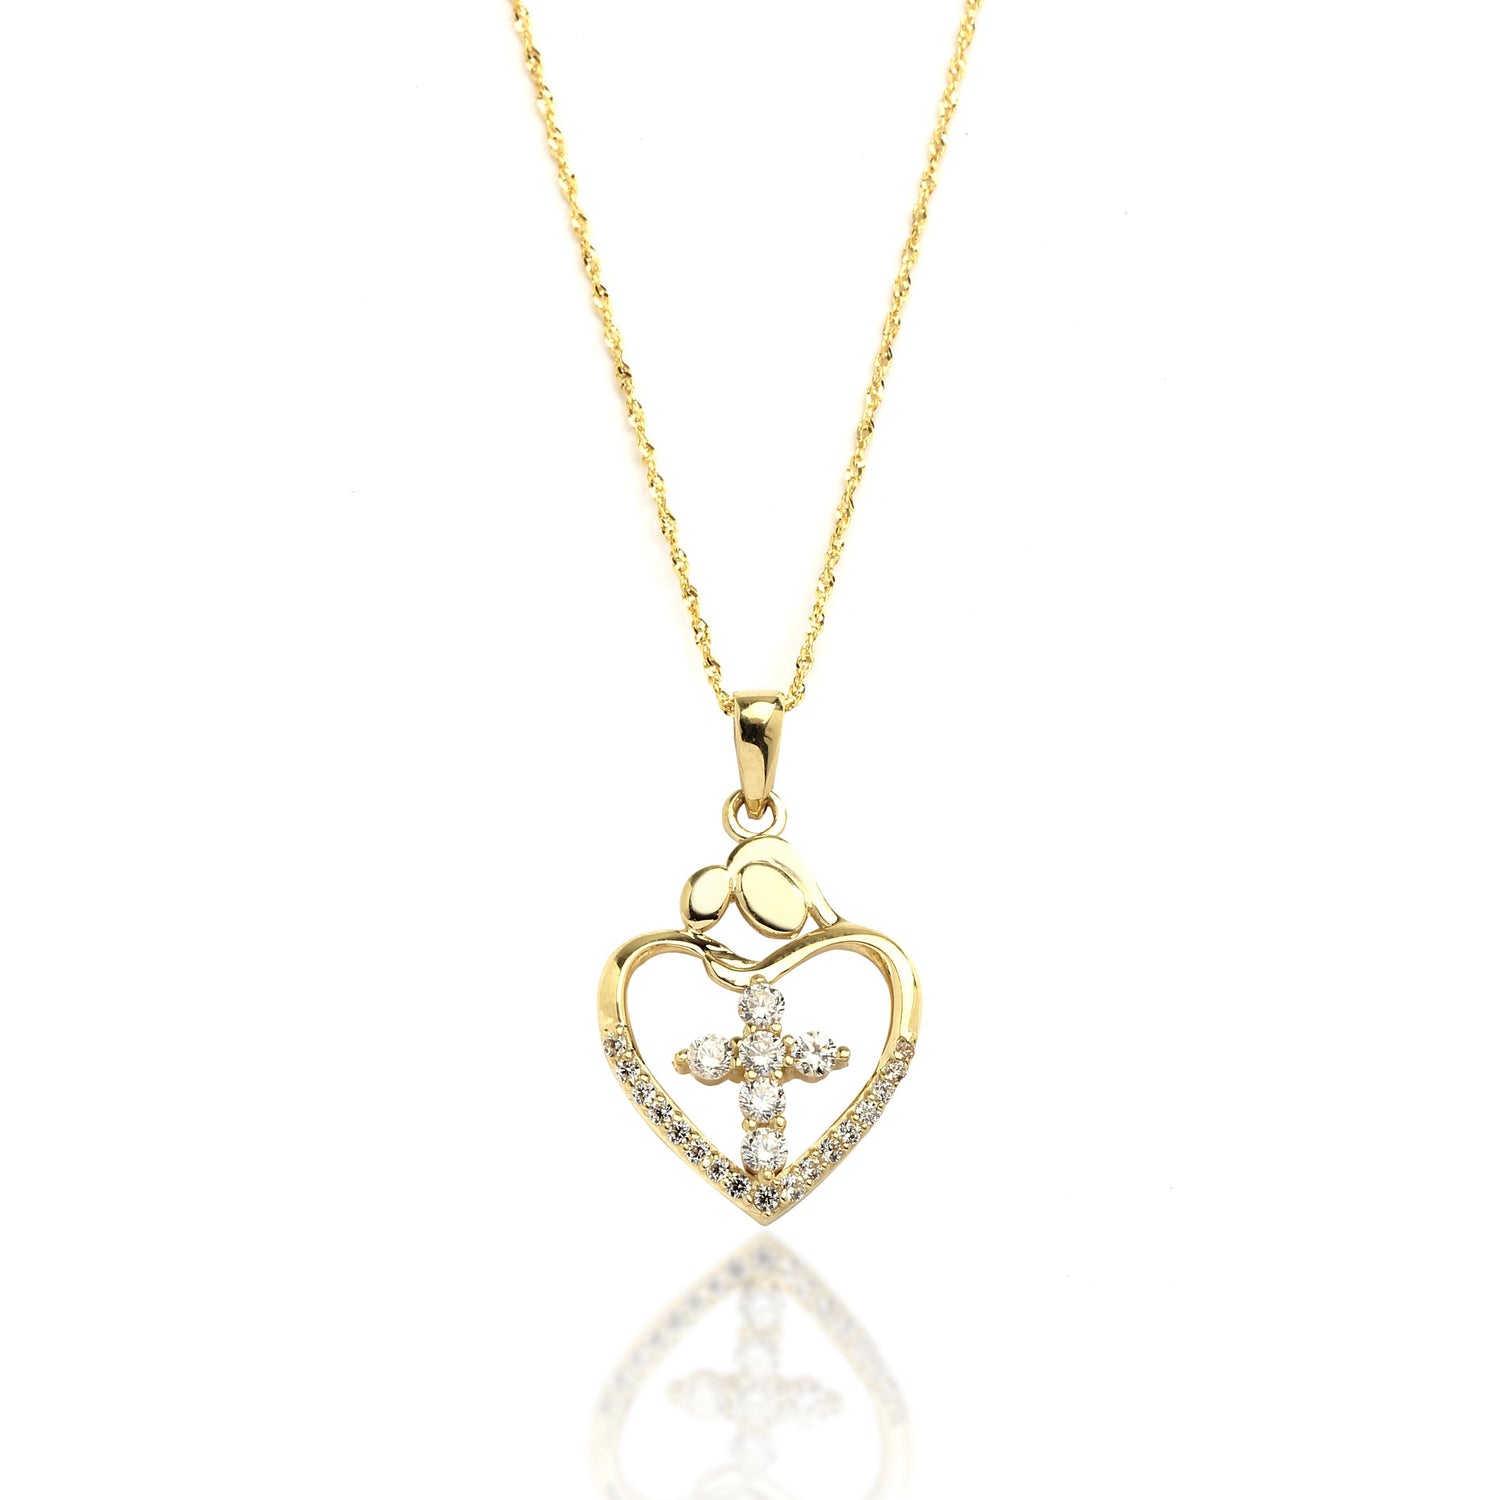 10k Yellow Gold Heart and Cross CZ Pendant Necklace with Singapore Chain